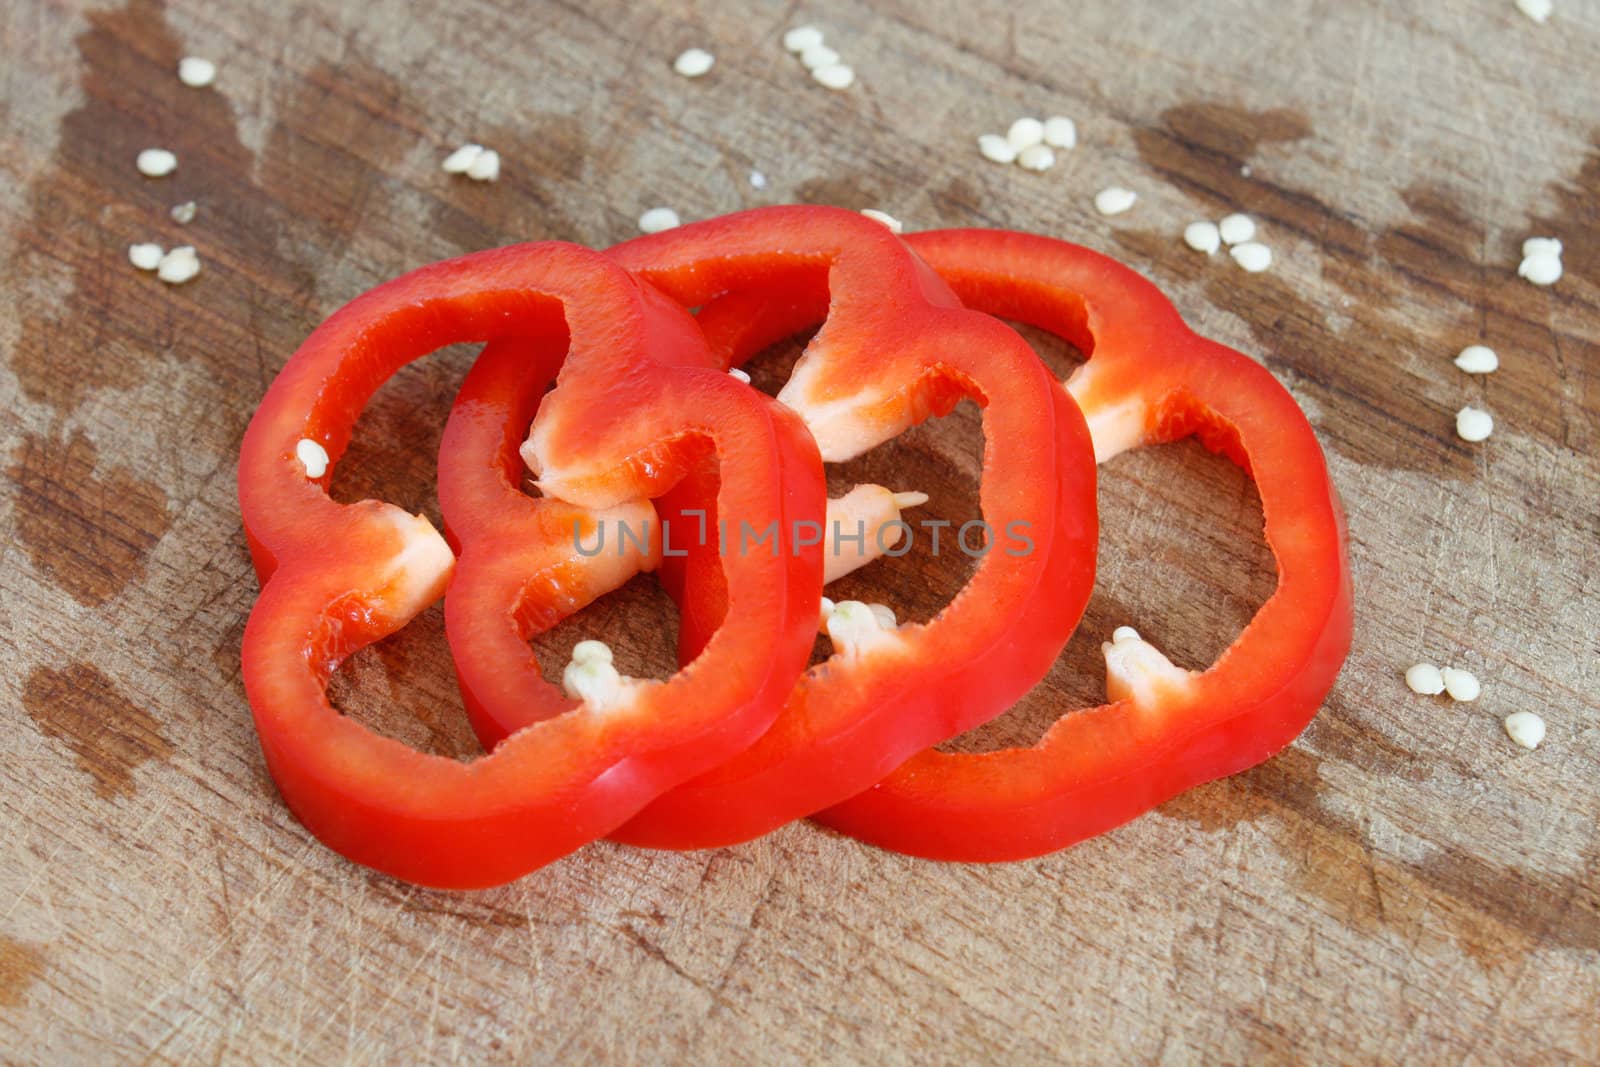 Red bell pepper on a background